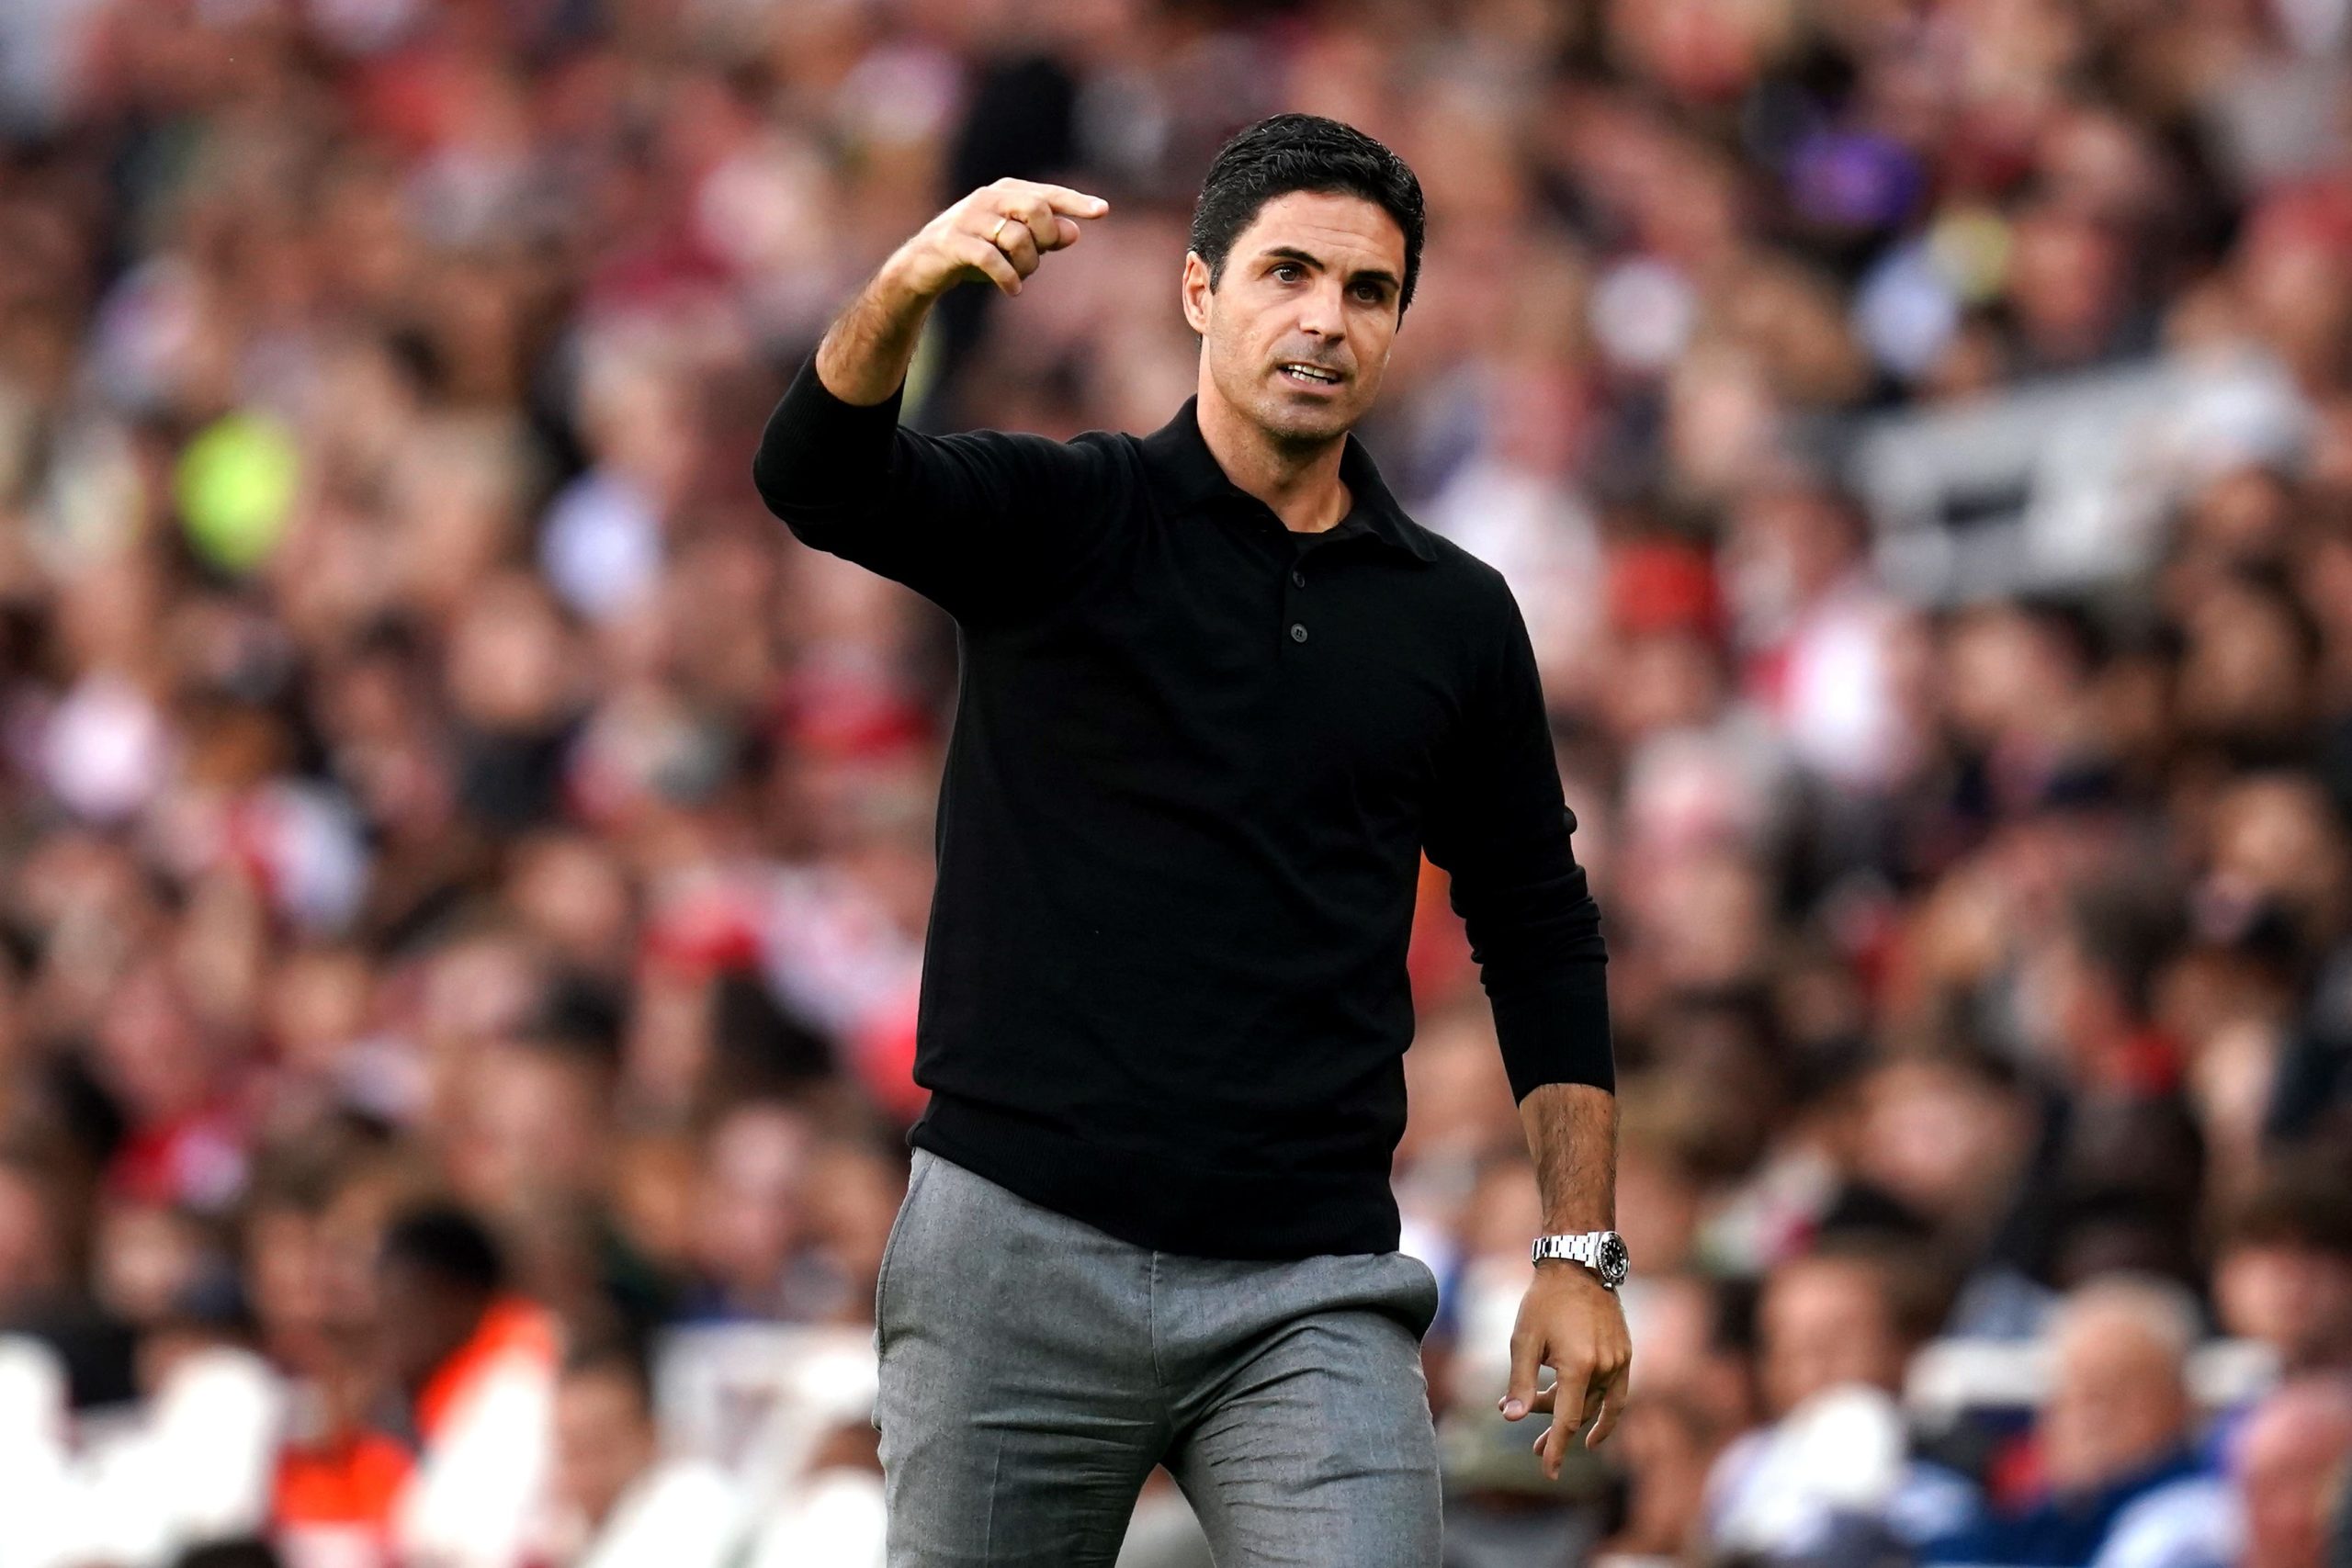 ‘He’s Super Talented’: Mikel Arteta is a Big Fan of the £64m Manchester United Player